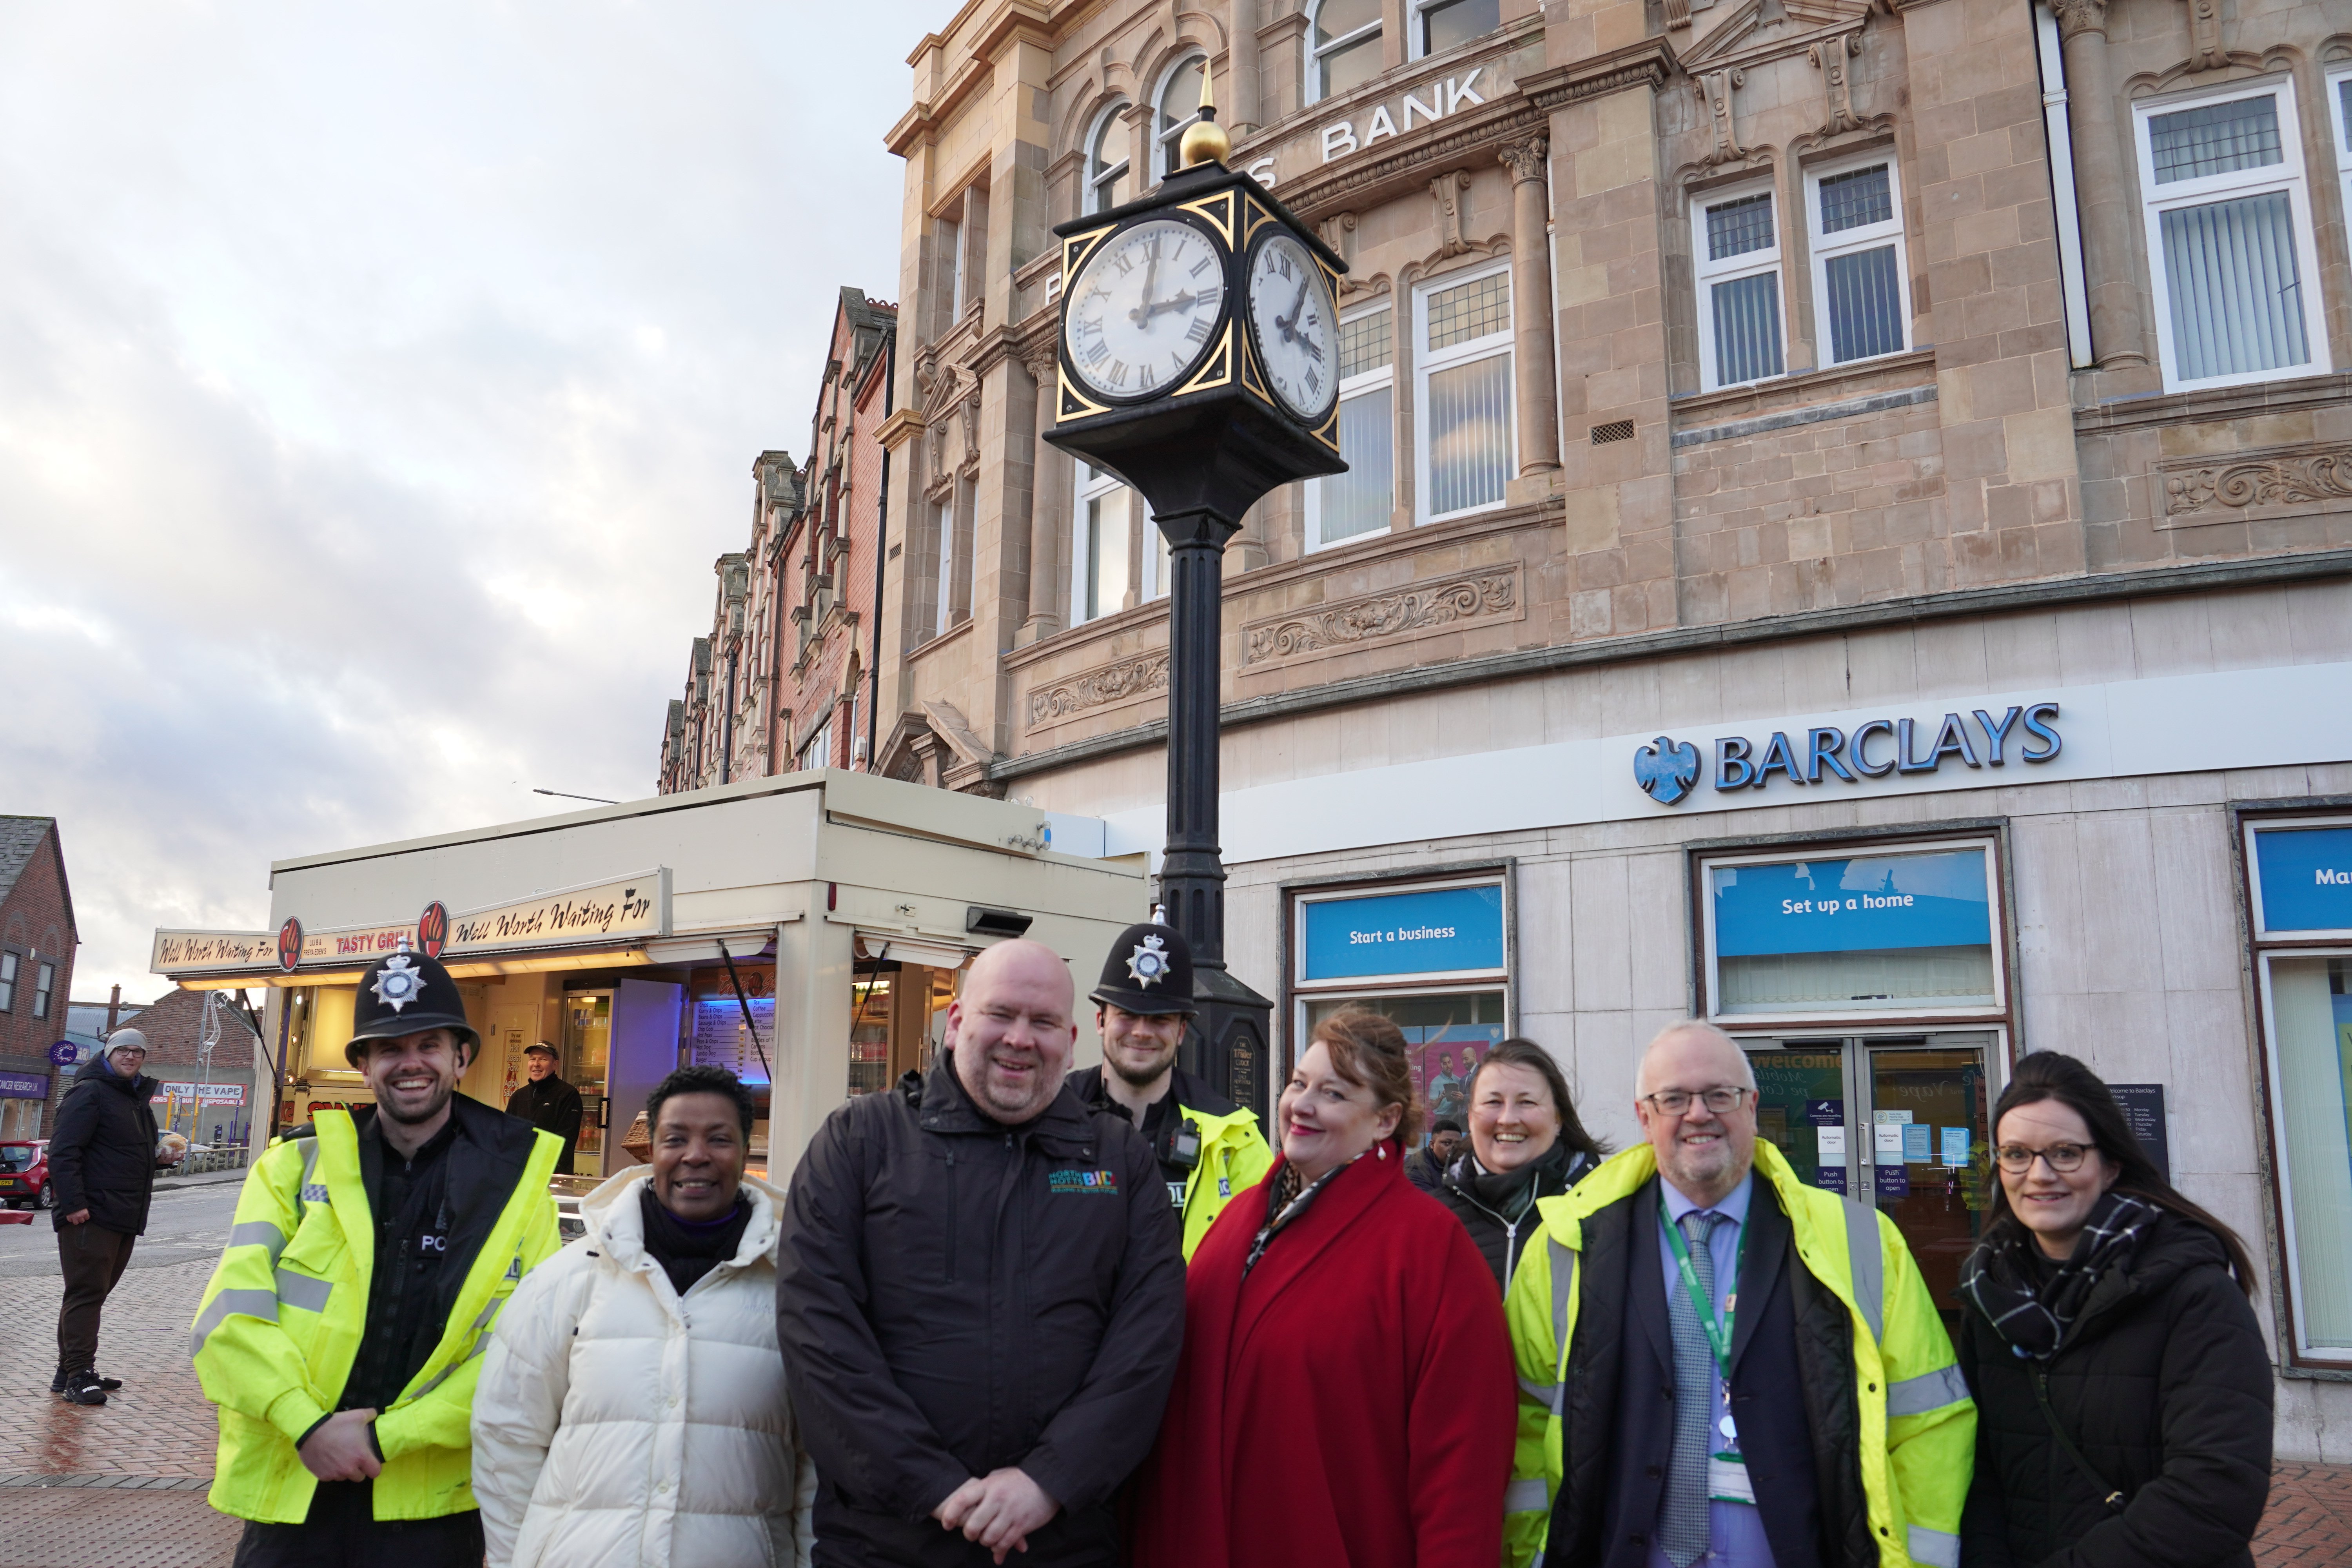 Worksop Safer Streets project sees reduction in Crime and ASB